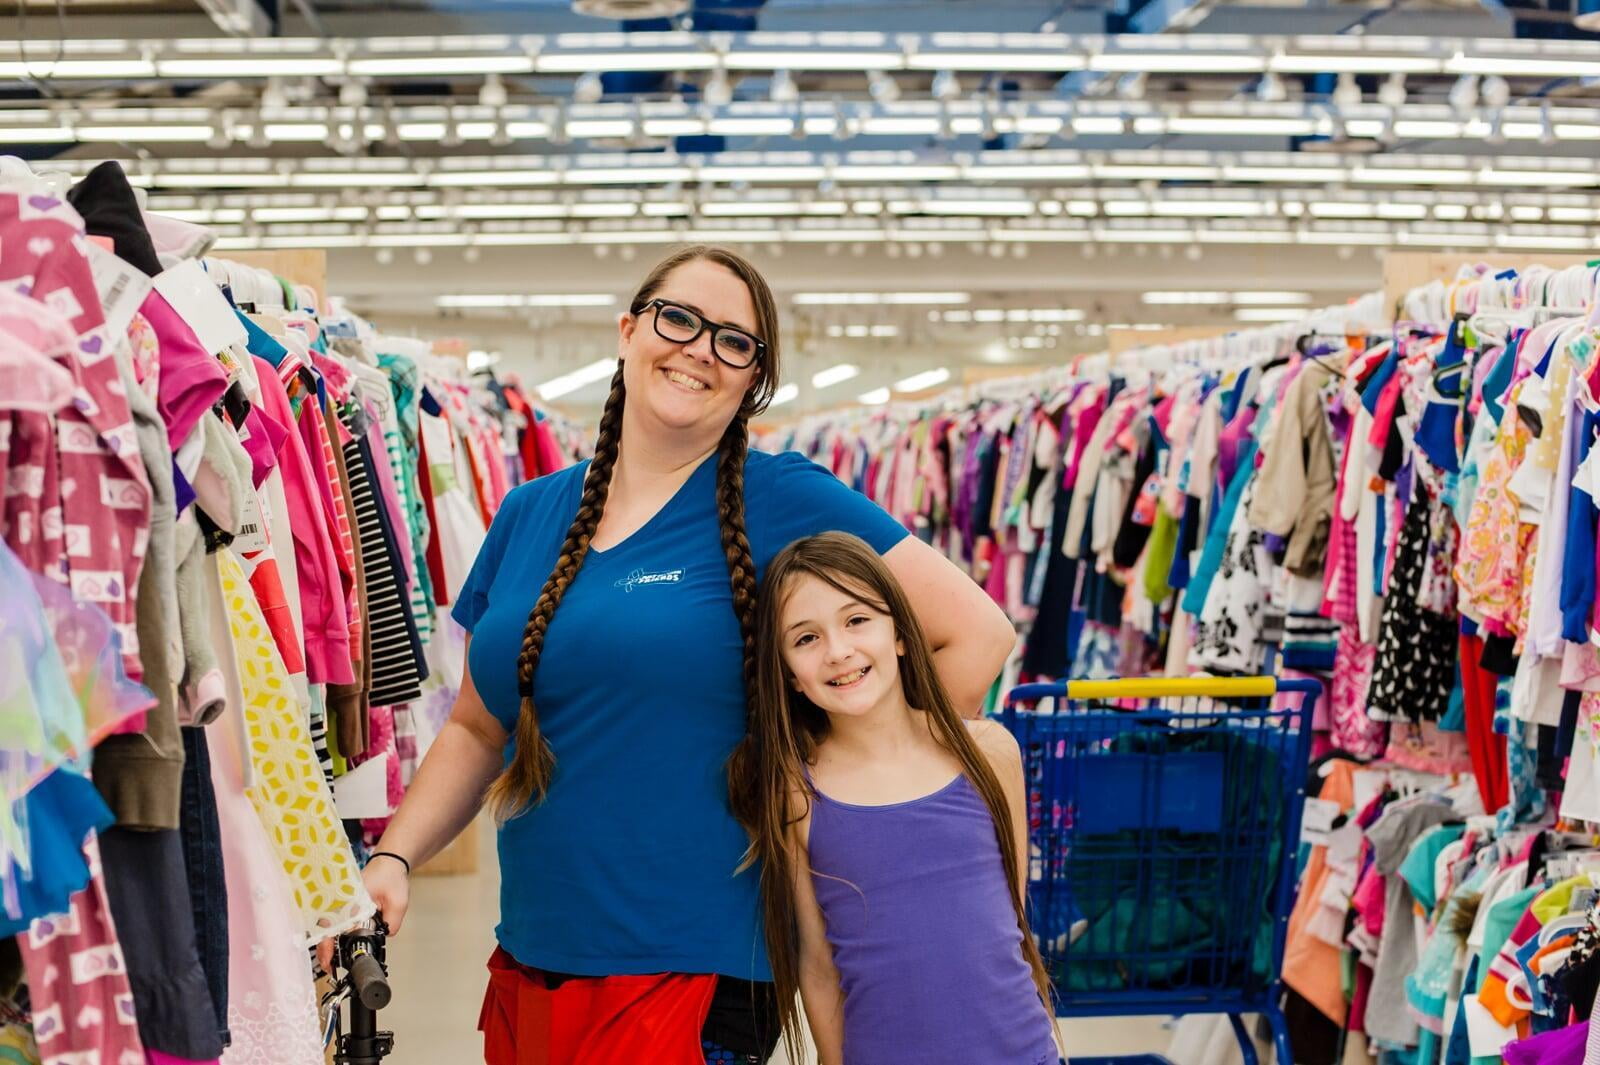 An employee is shopping with her daughter and is smiling towards the camera surrounded by handing clothes.